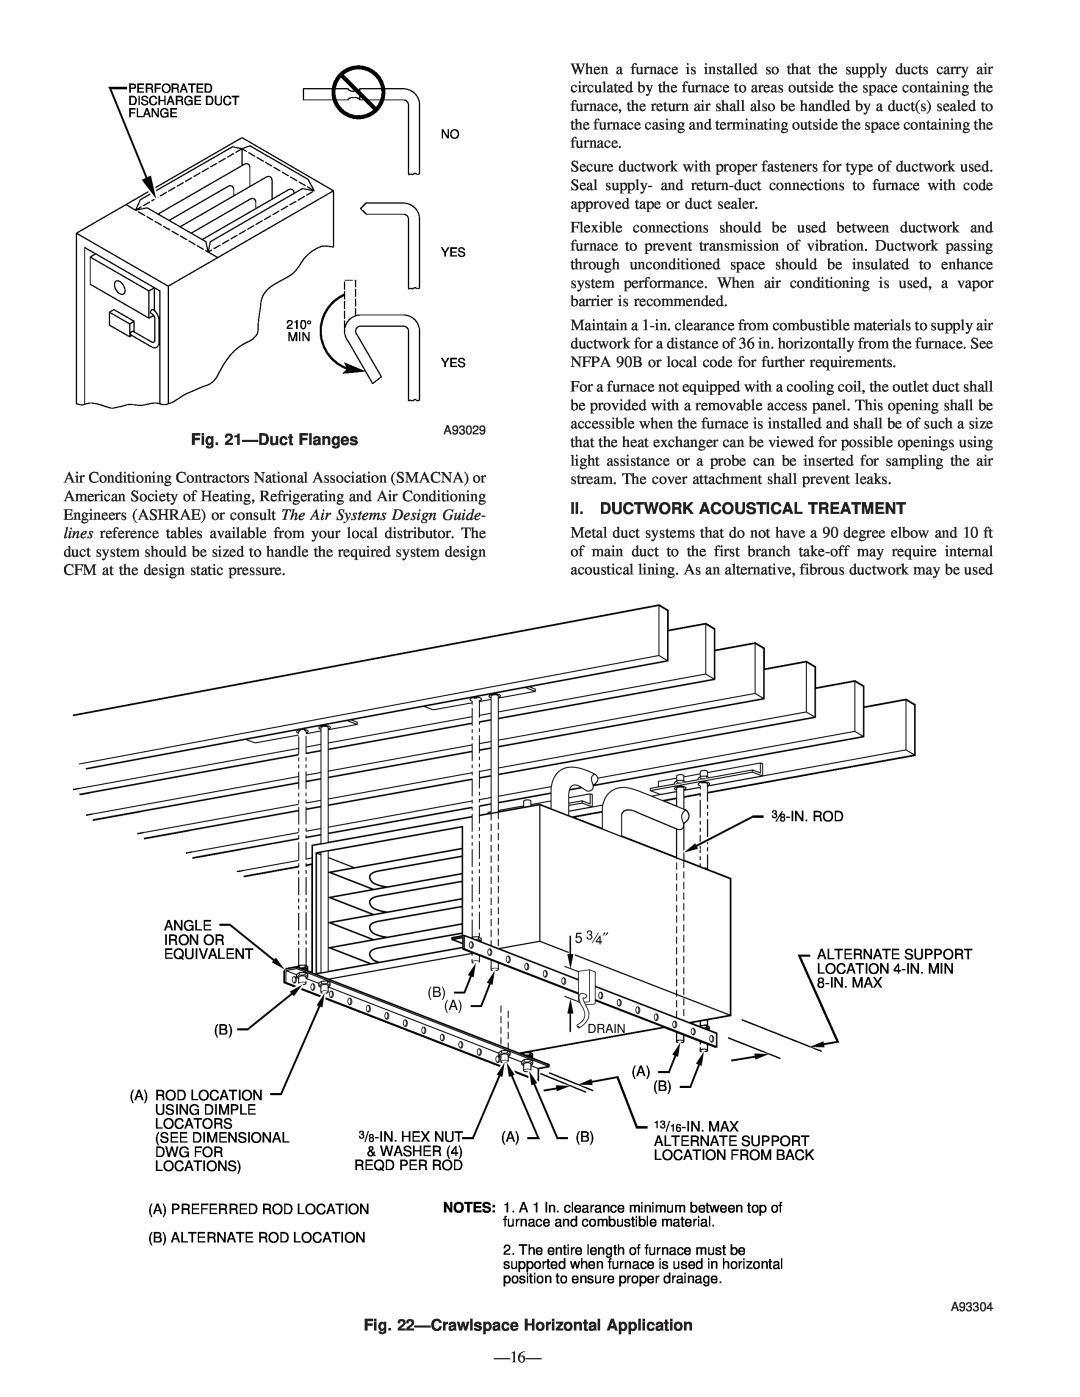 Bryant 340MAV instruction manual DuctFlanges, Ii. Ductwork Acoustical Treatment, CrawlspaceHorizontal Application 